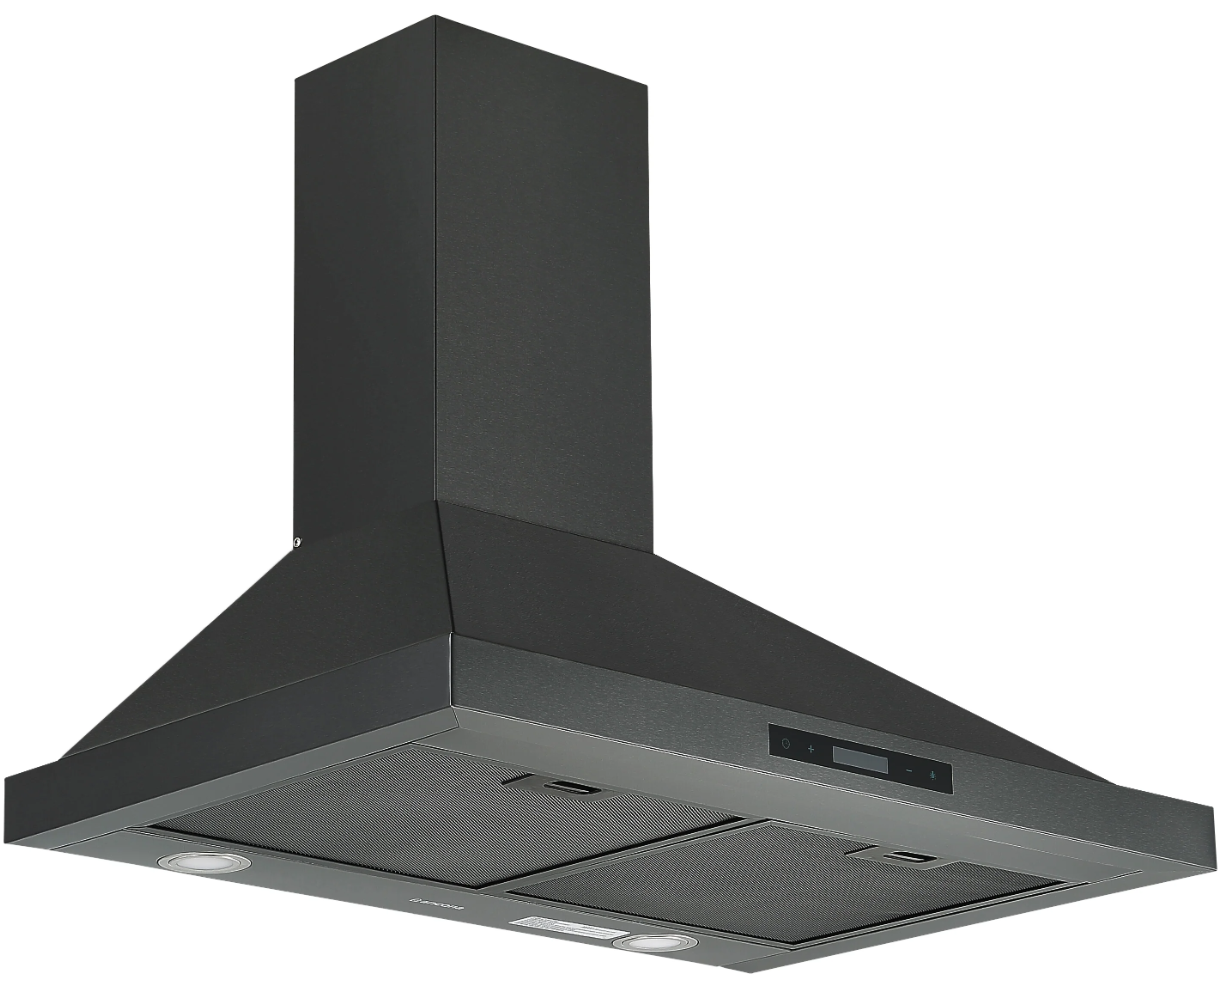 Ancona AN-1574 30 in. Black Stainless Steel Convertible Wall Mount Pyramid Range Hood